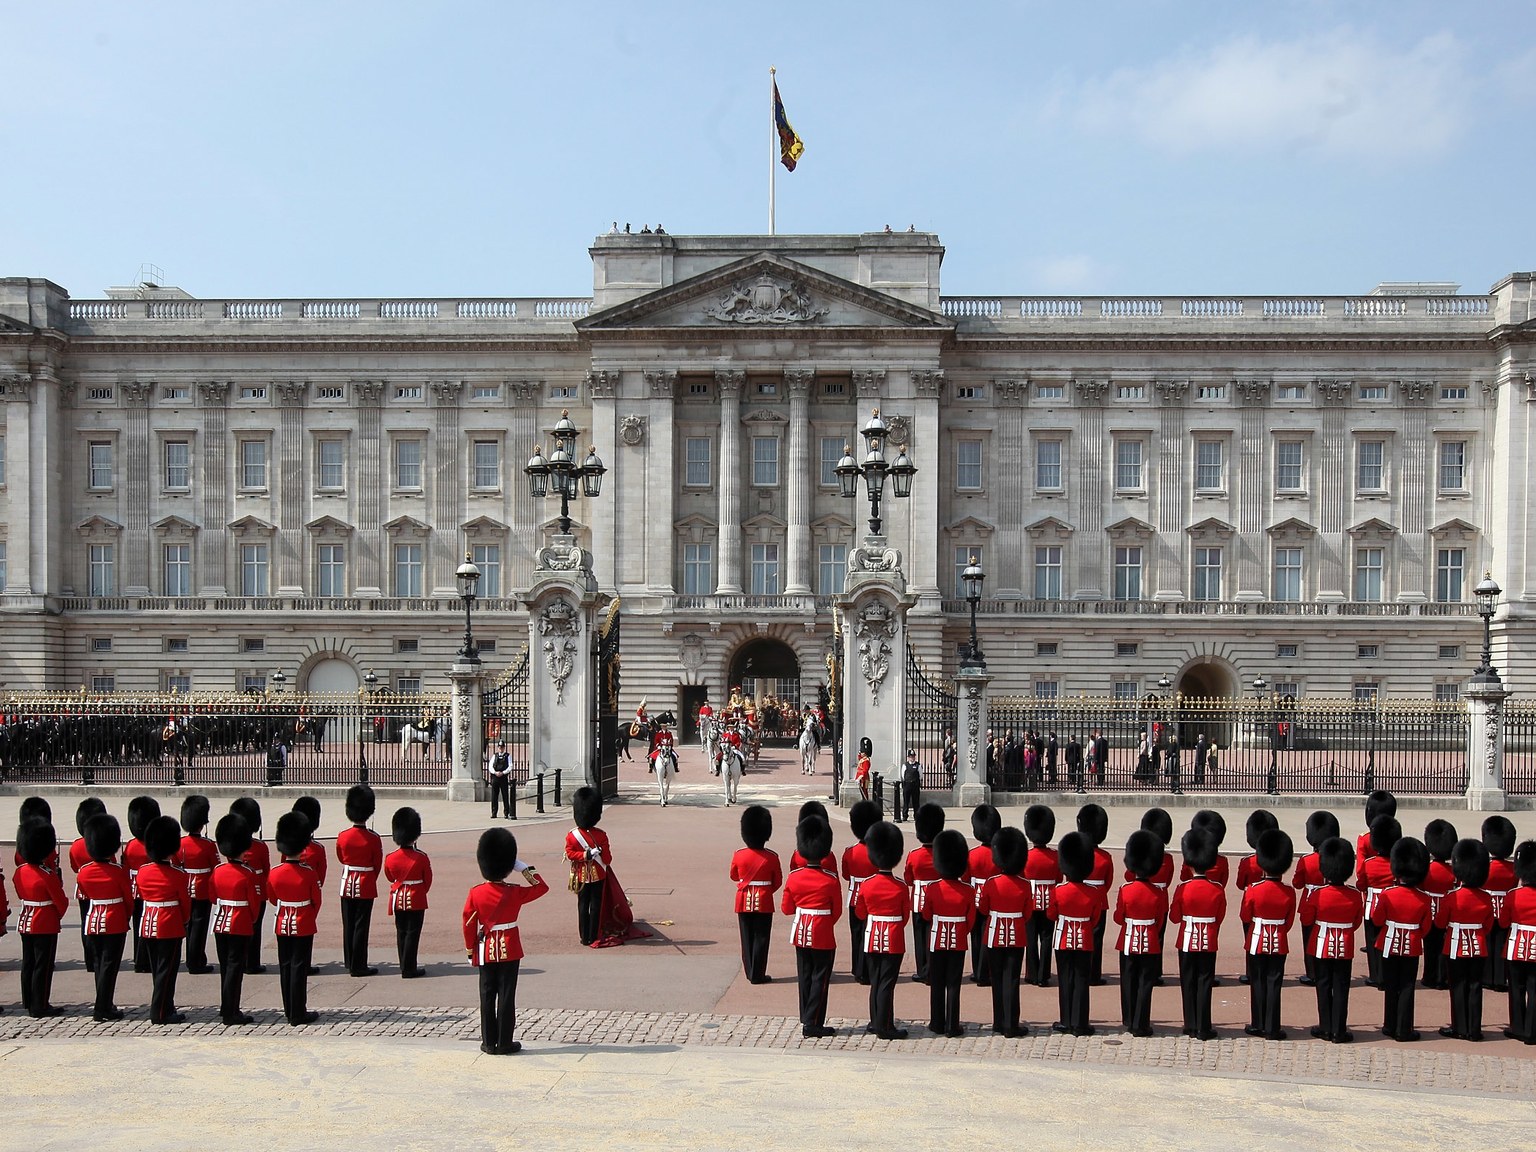 Challenge Yourself in This General Knowledge Quiz — Do You Have What It Takes to Score 75%? Buckingham Palace